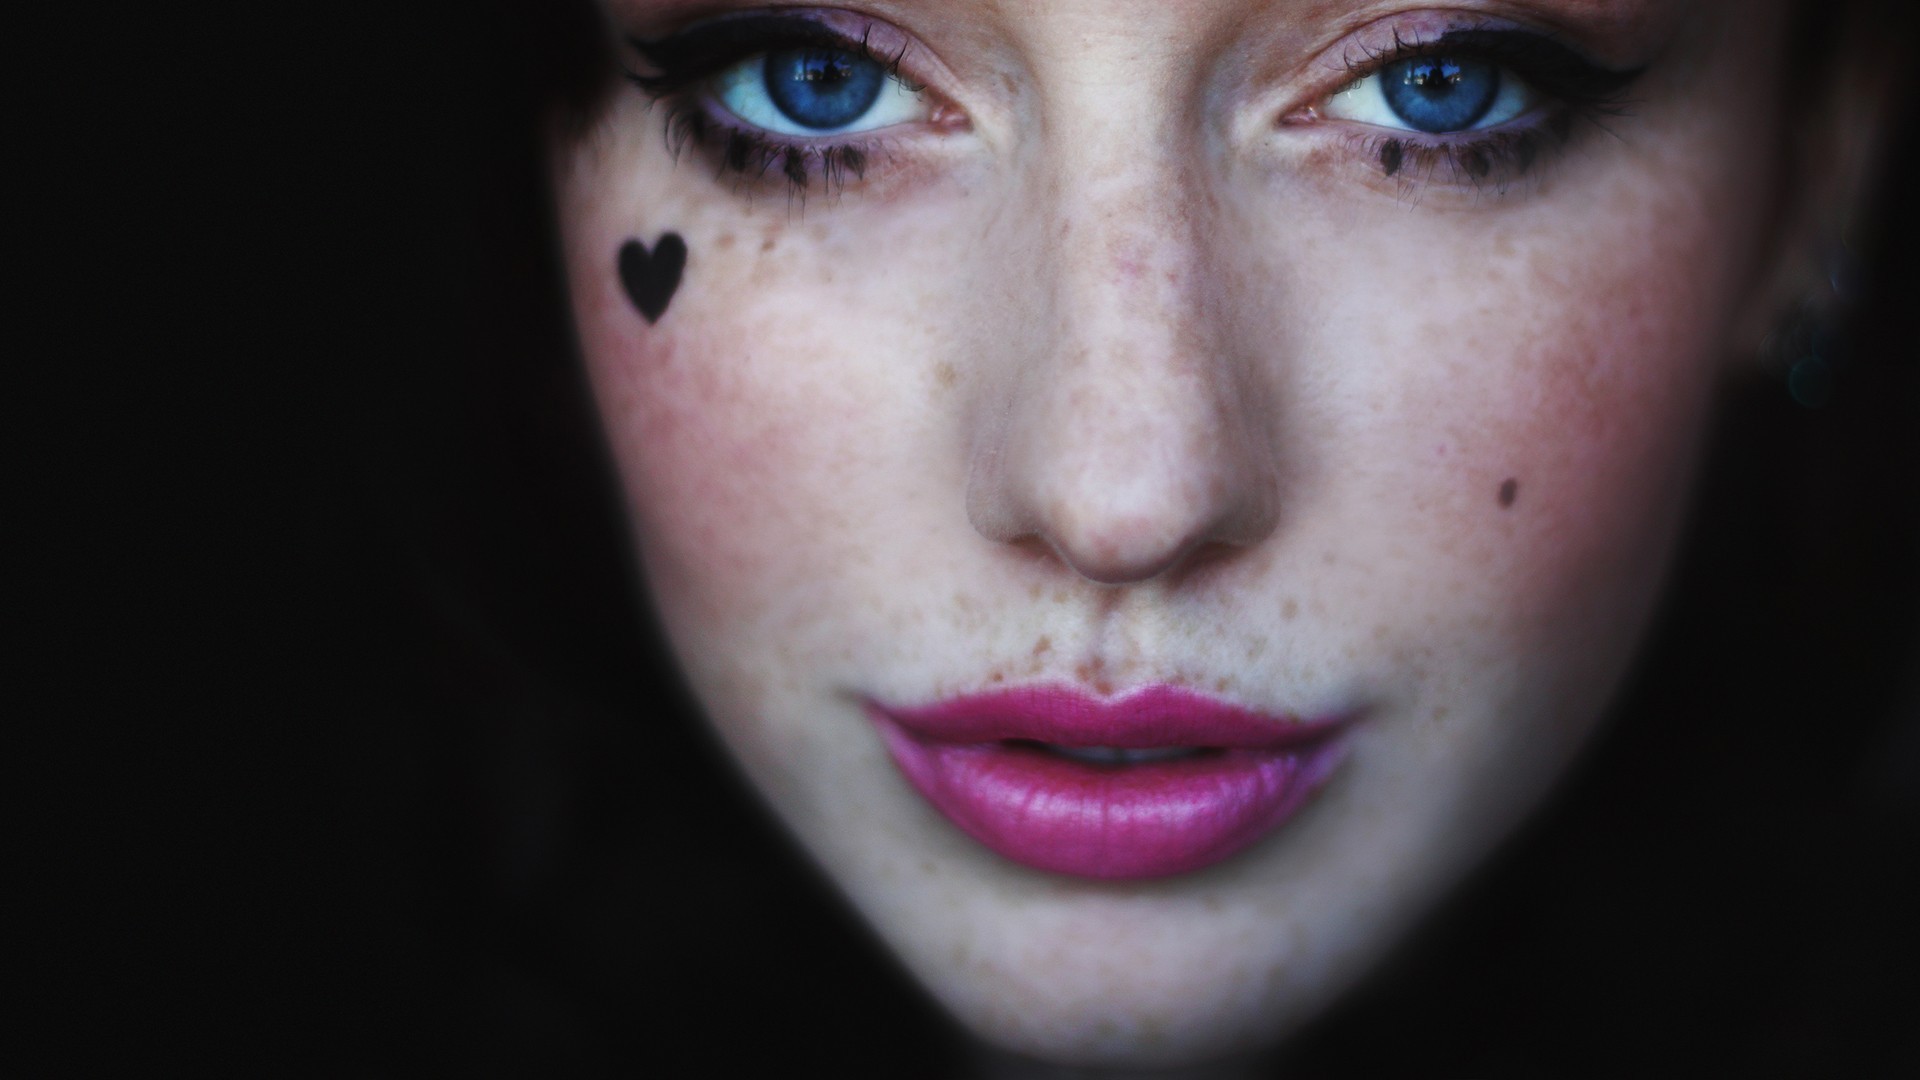 People 1920x1080 face women blue eyes freckles closeup heart (tattoo) looking at viewer pink lipstick simple background black background model portrait